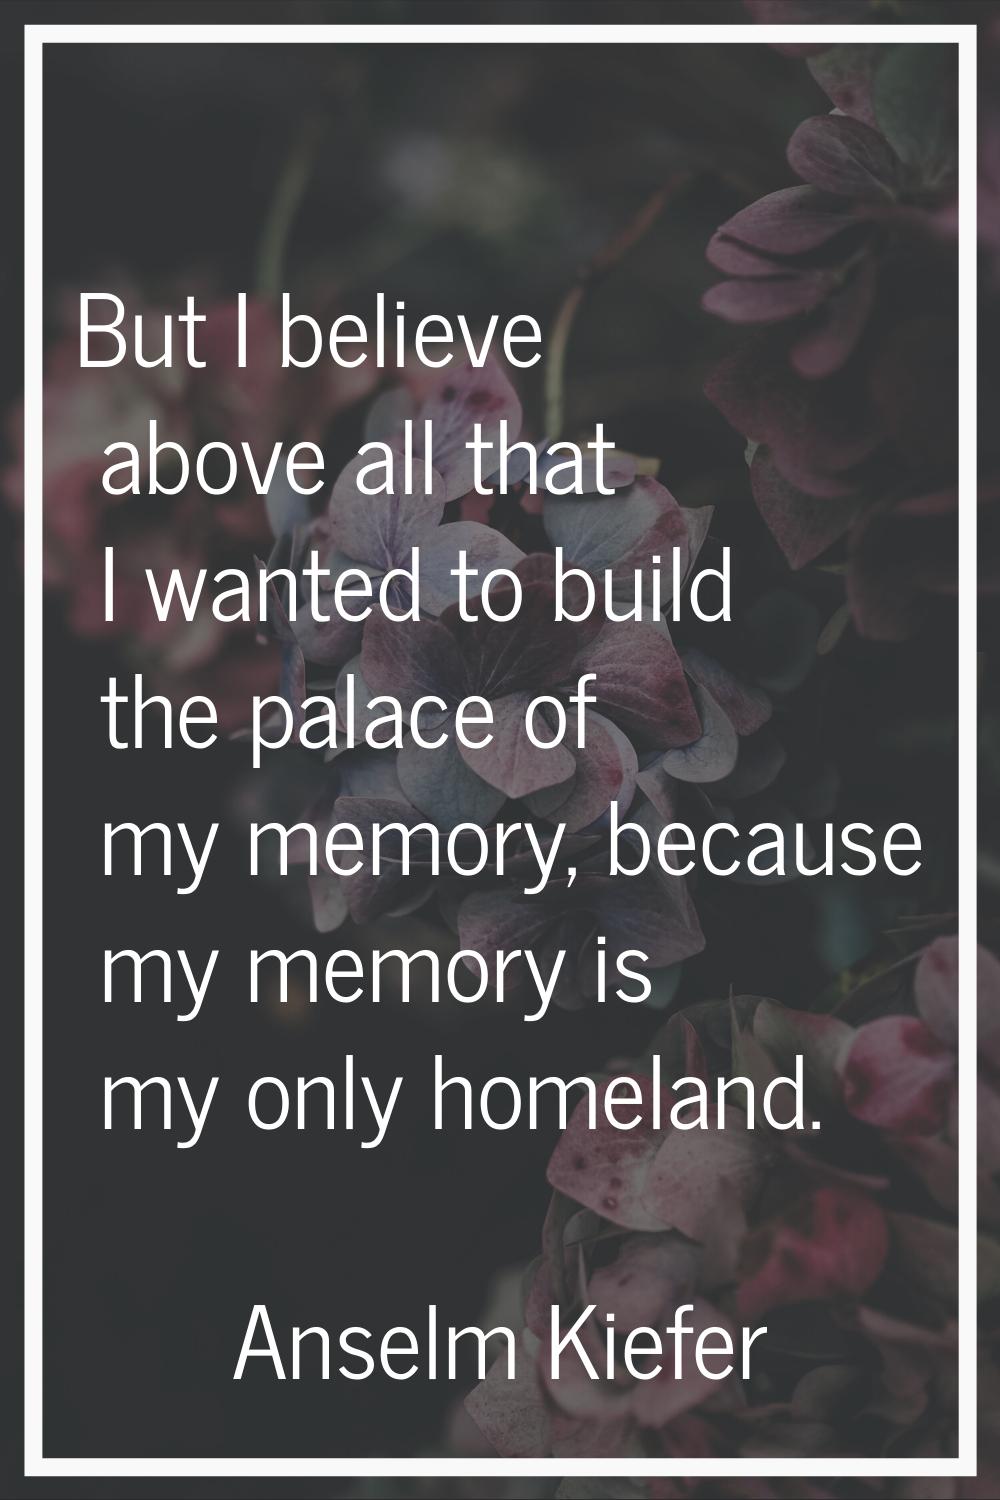 But I believe above all that I wanted to build the palace of my memory, because my memory is my onl